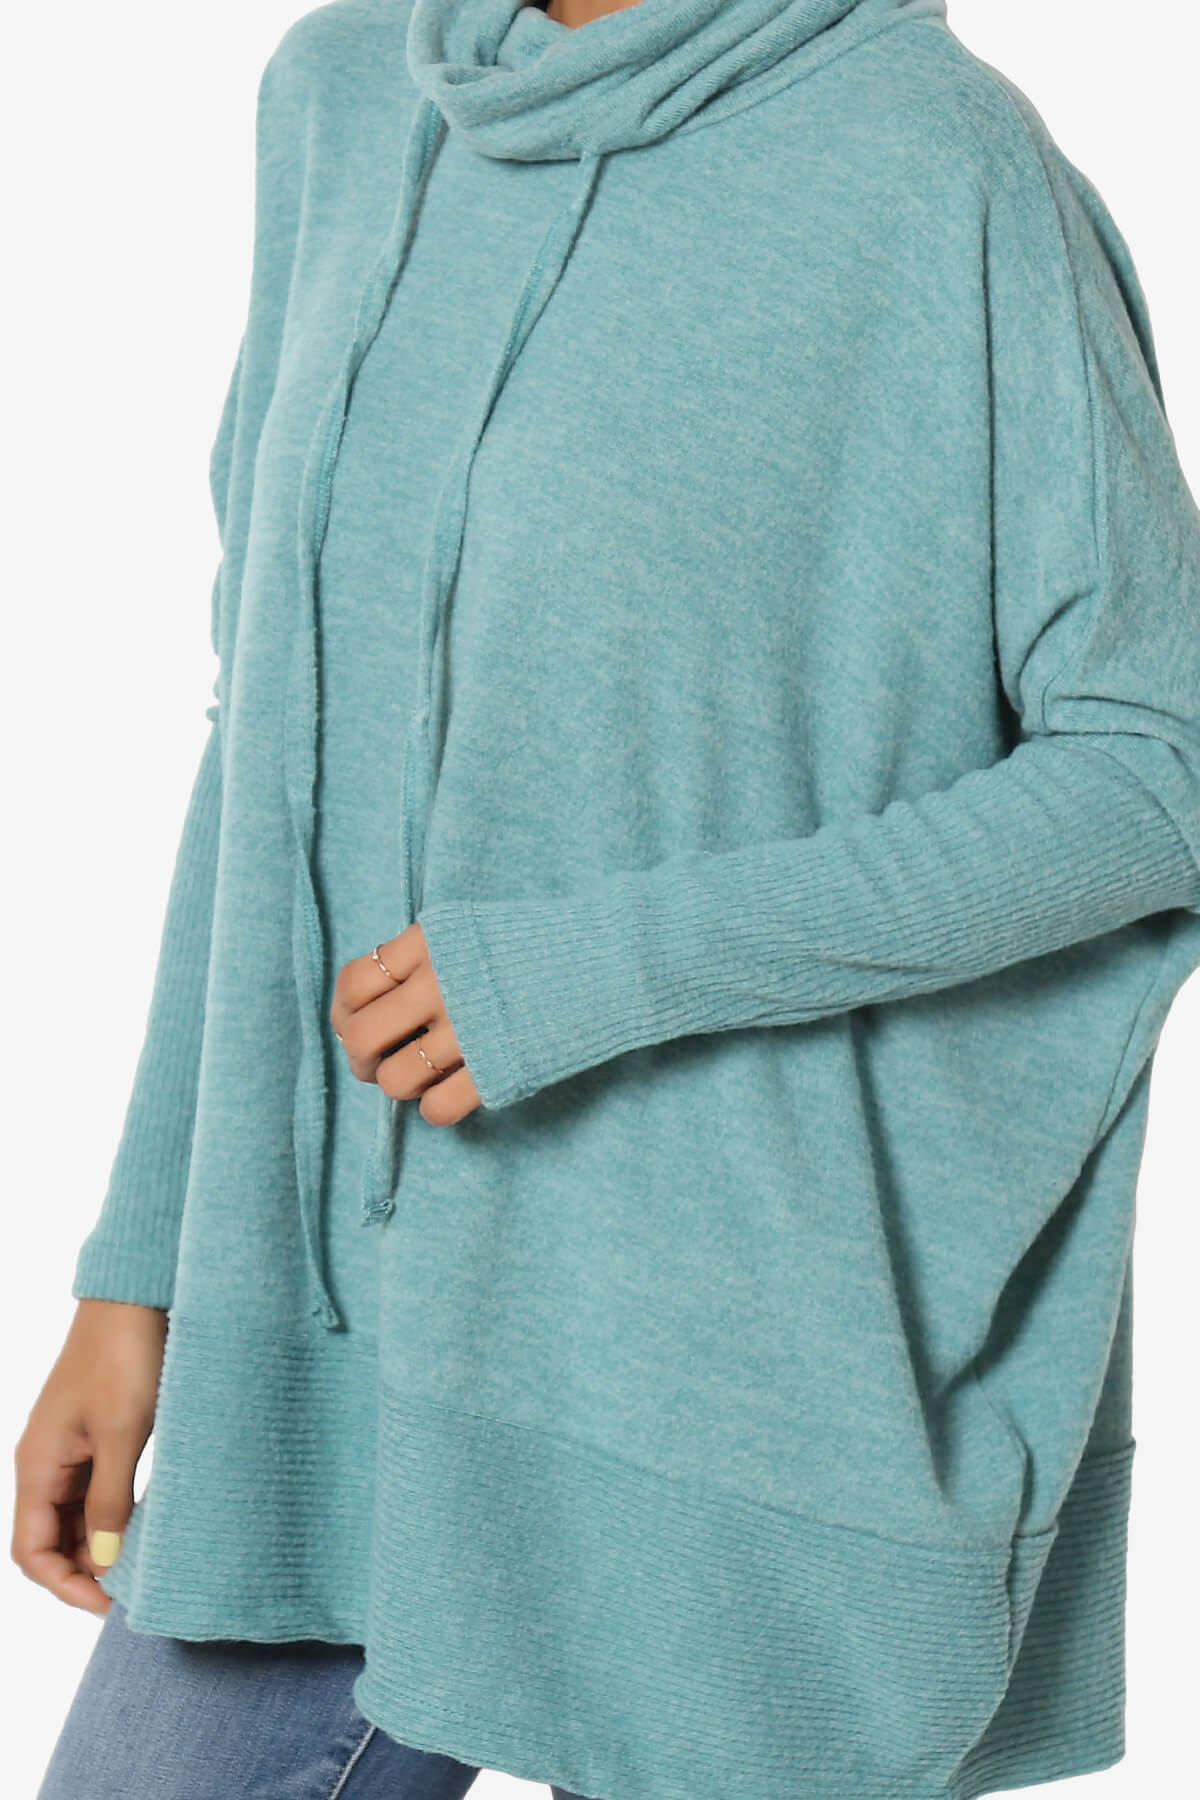 Barclay Cowl Neck Melange Knit Oversized Sweater DUSTY TEAL_5